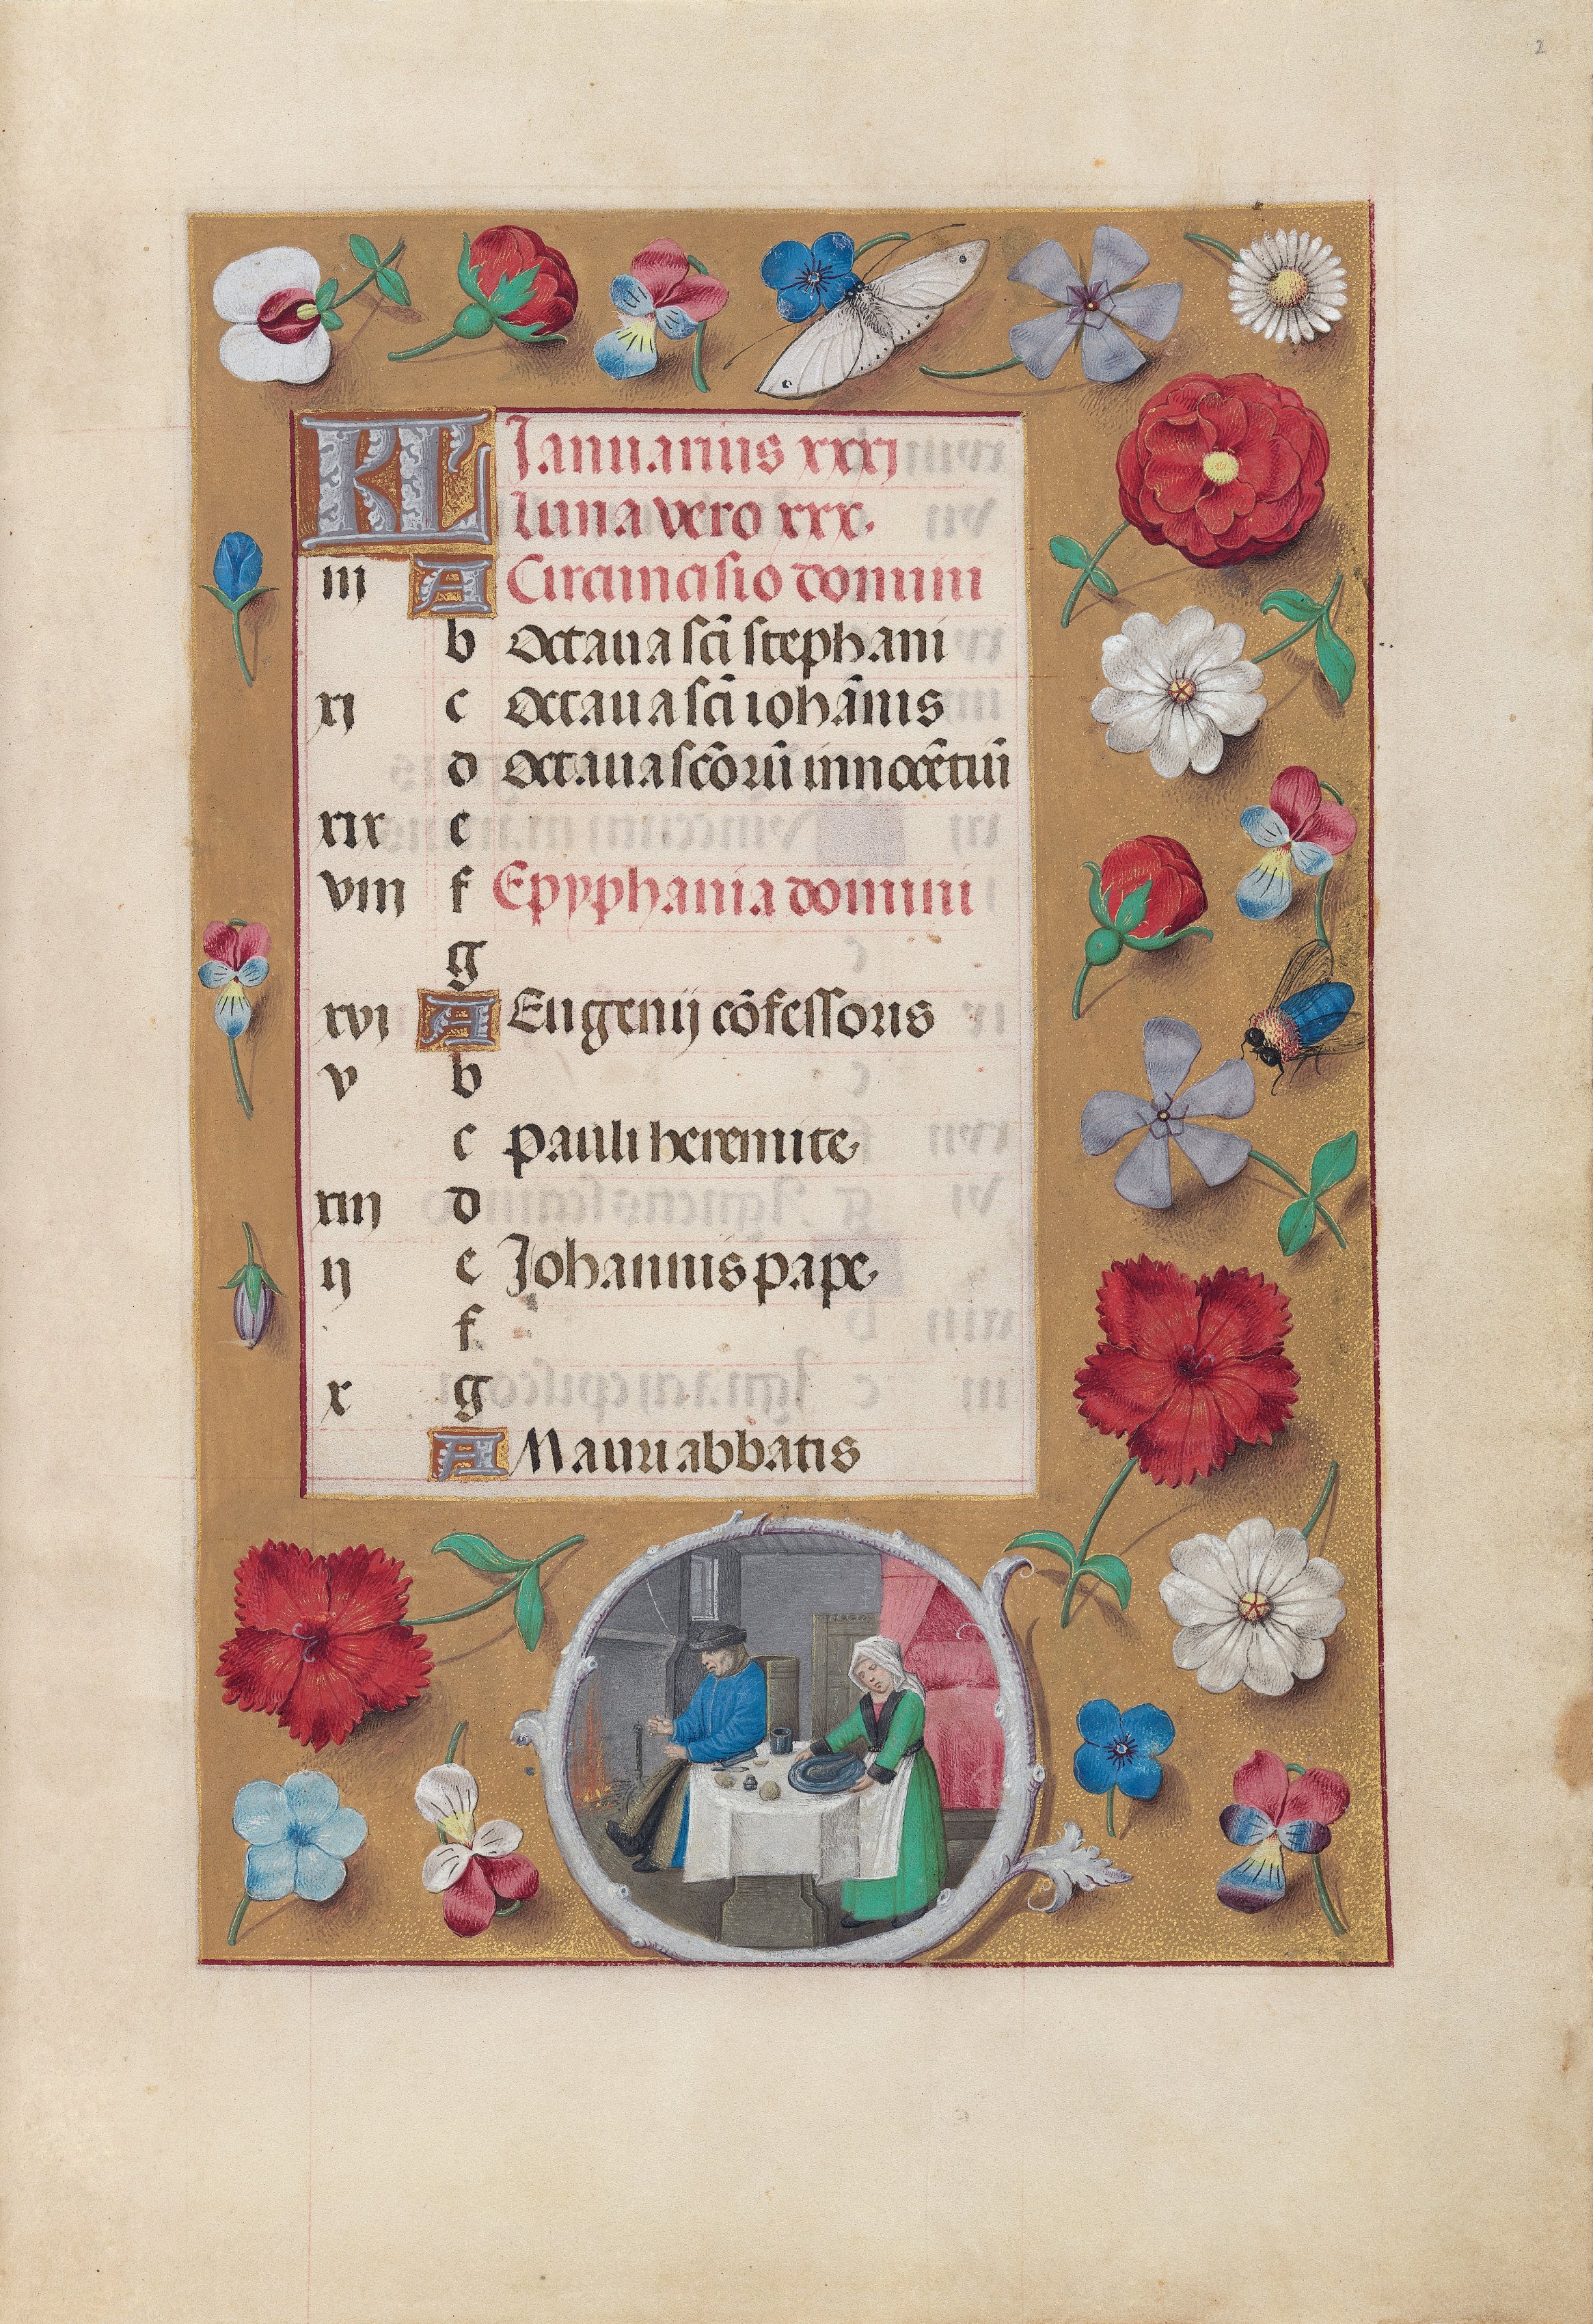 Hours of Queen Isabella the Catholic, Queen of Spain:  Fol. 2r, January - Feast